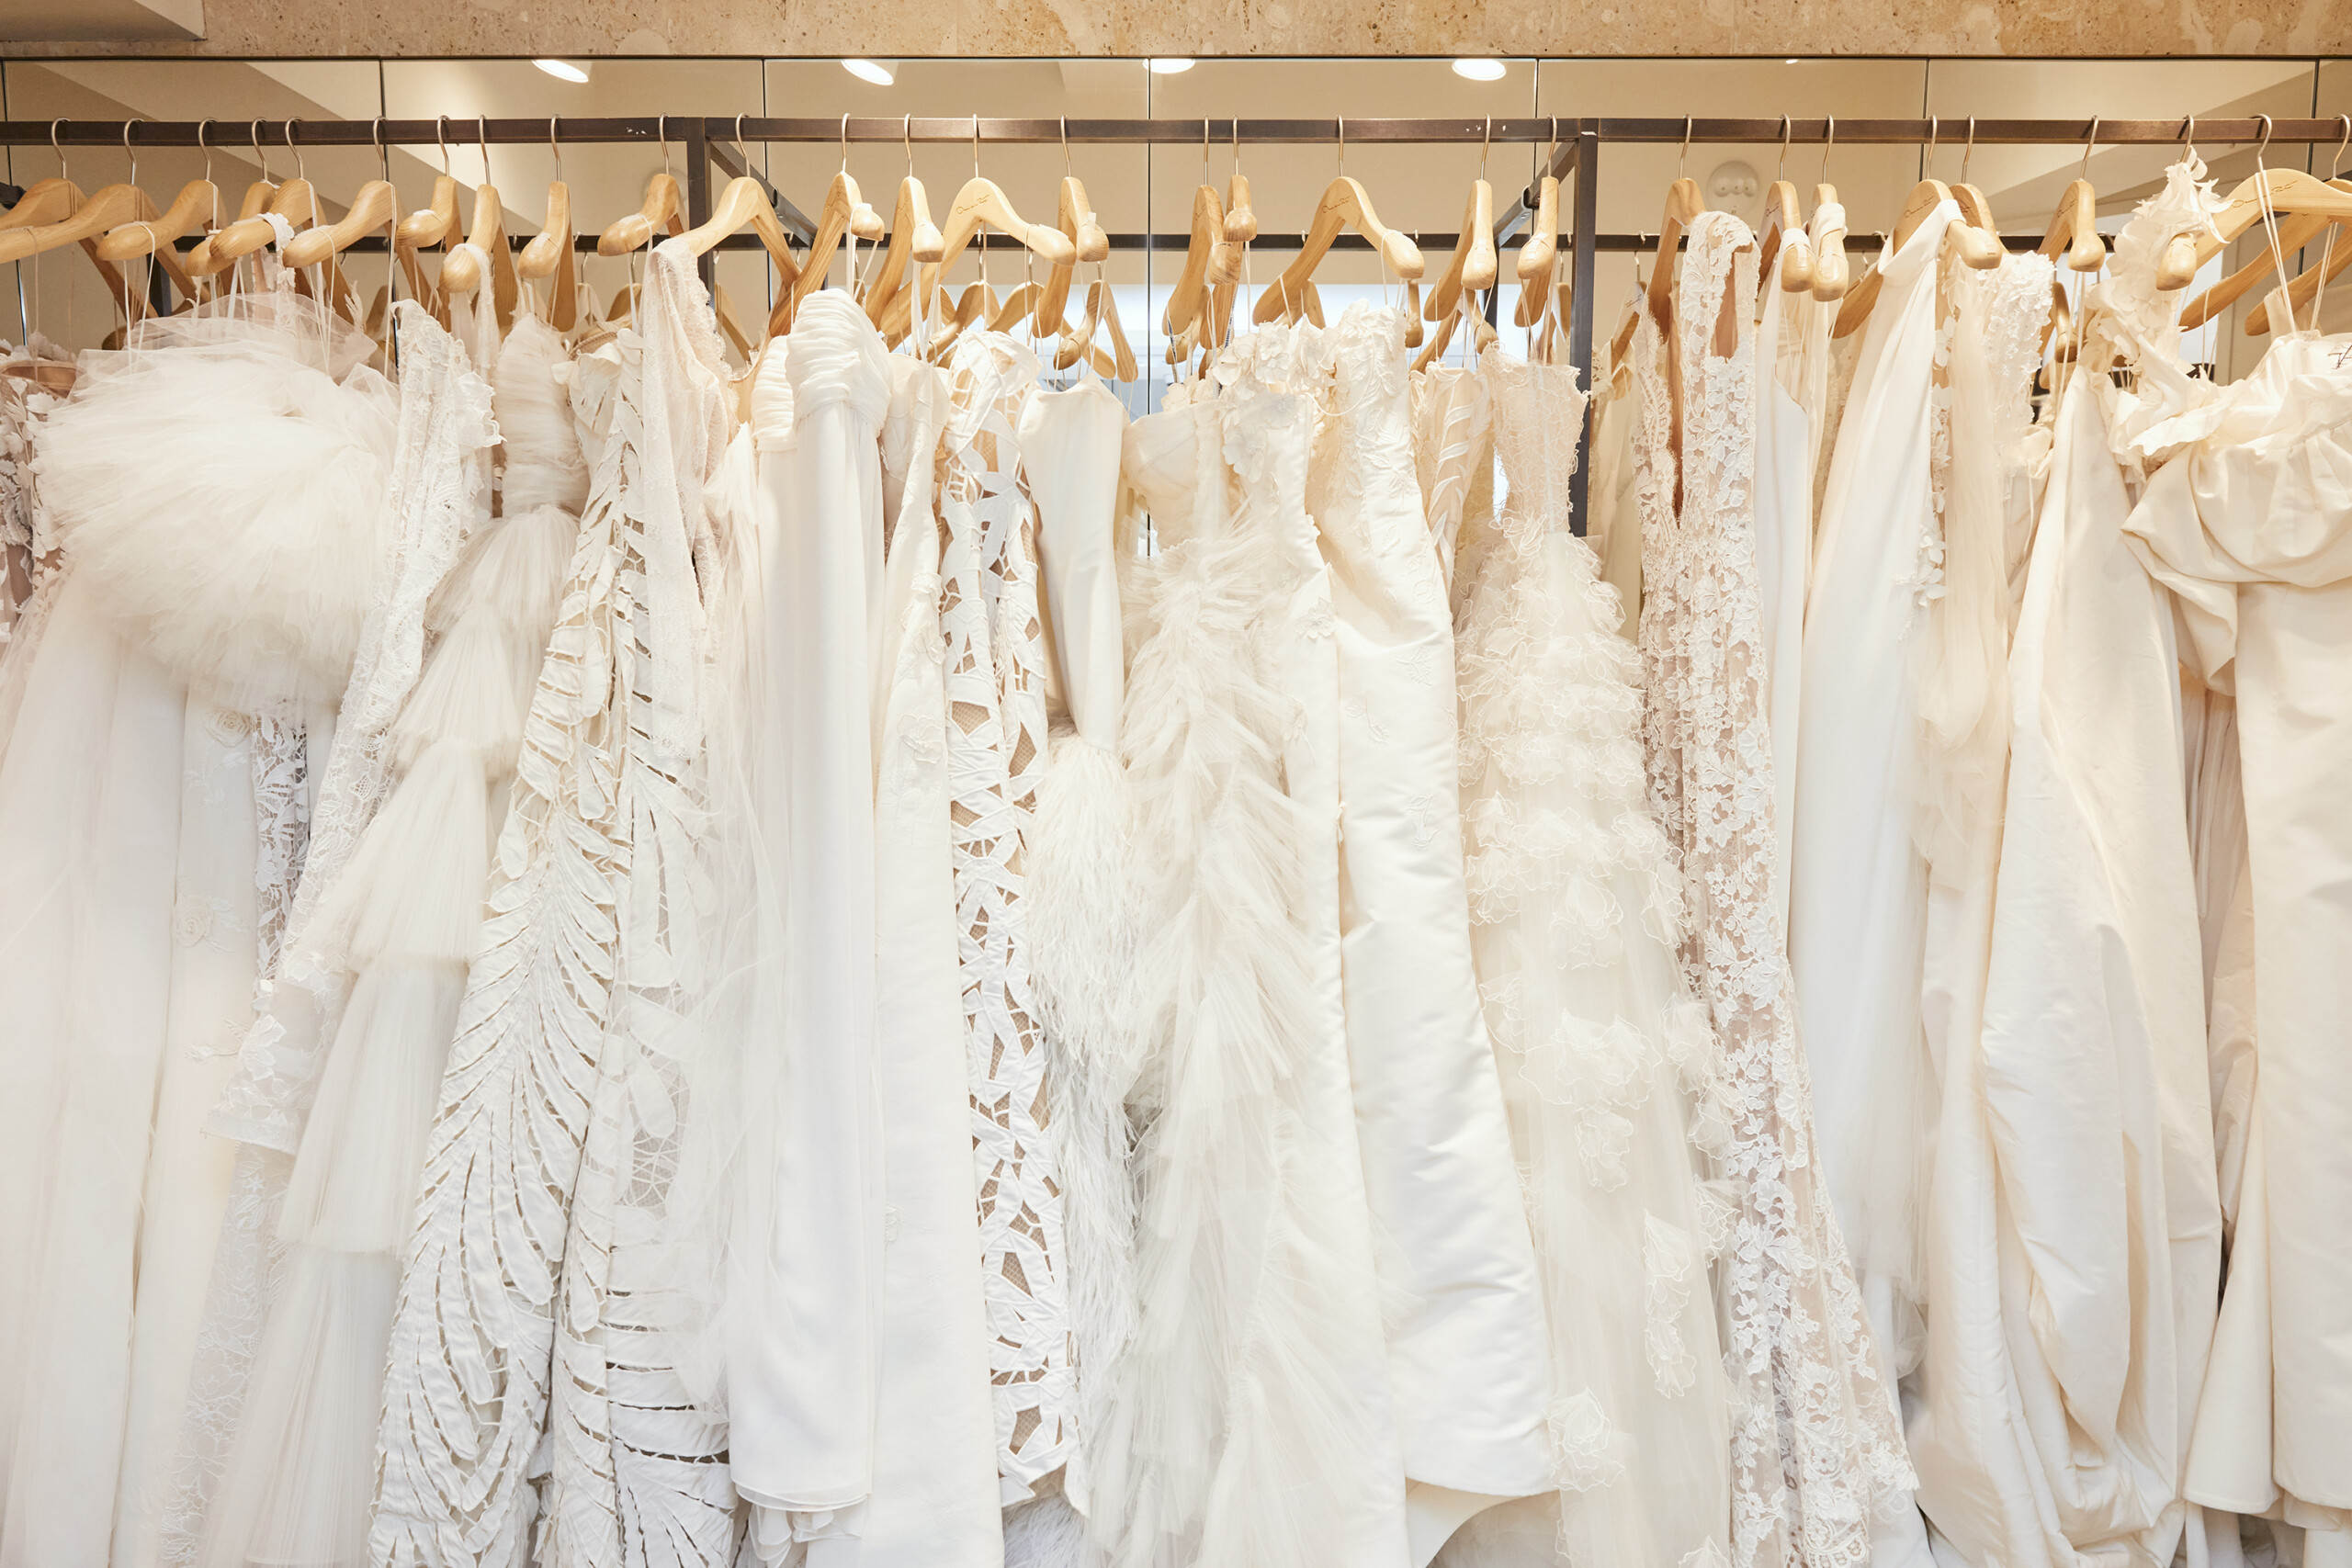 How to Know if Your Wedding Dress is the One